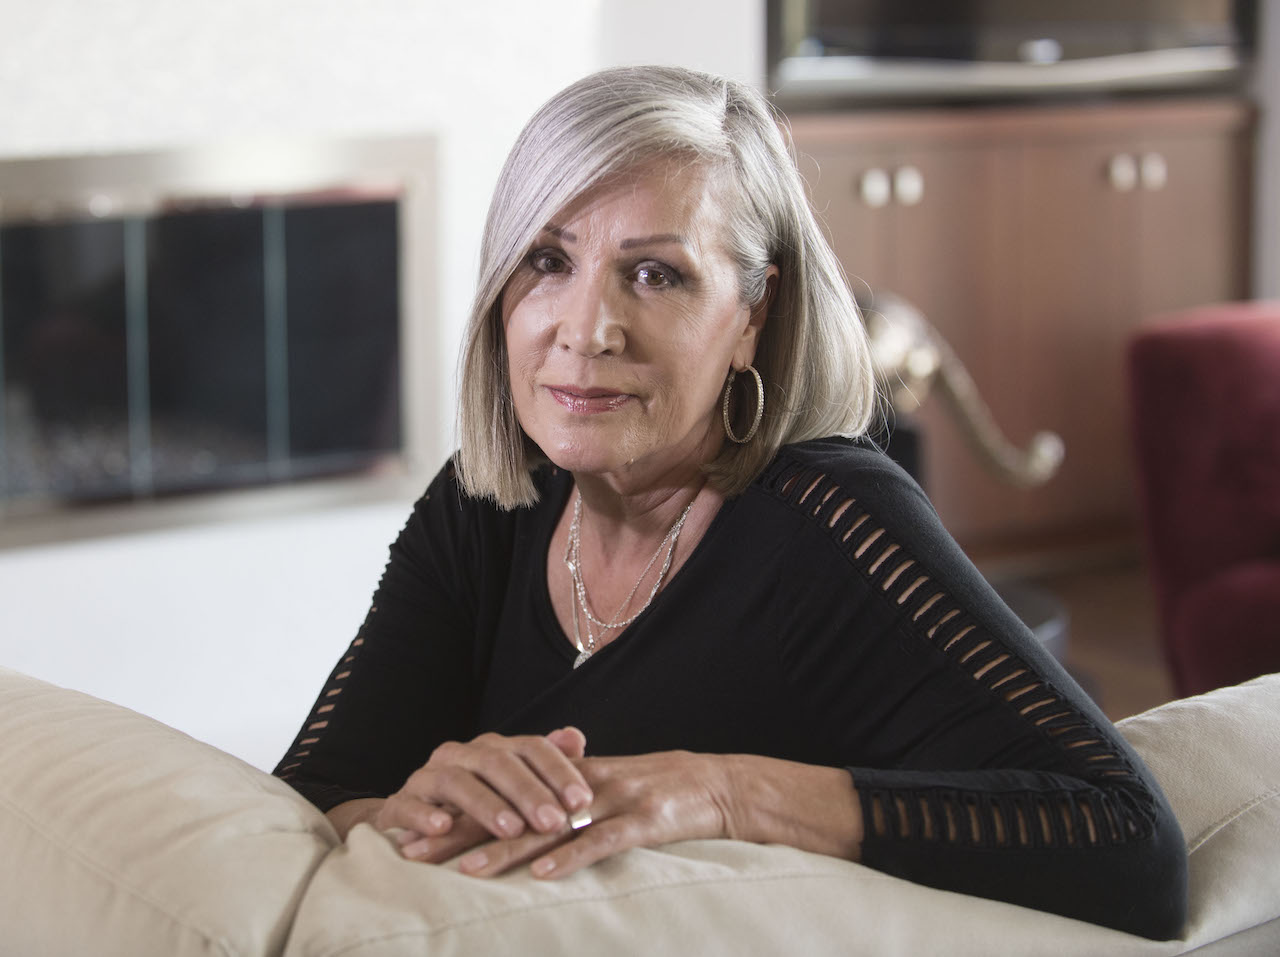 It’s been 15 years since Barbara Van Rooyan lost her son, Patrick Stewart, to a single OxyContin pill. Van Rooyan has since channeled her grief into intense research about Oxy’s vast potential for damage and has become one of the trailblazers of the anti-OxyContin movement. (Ana Venegas for KHN)